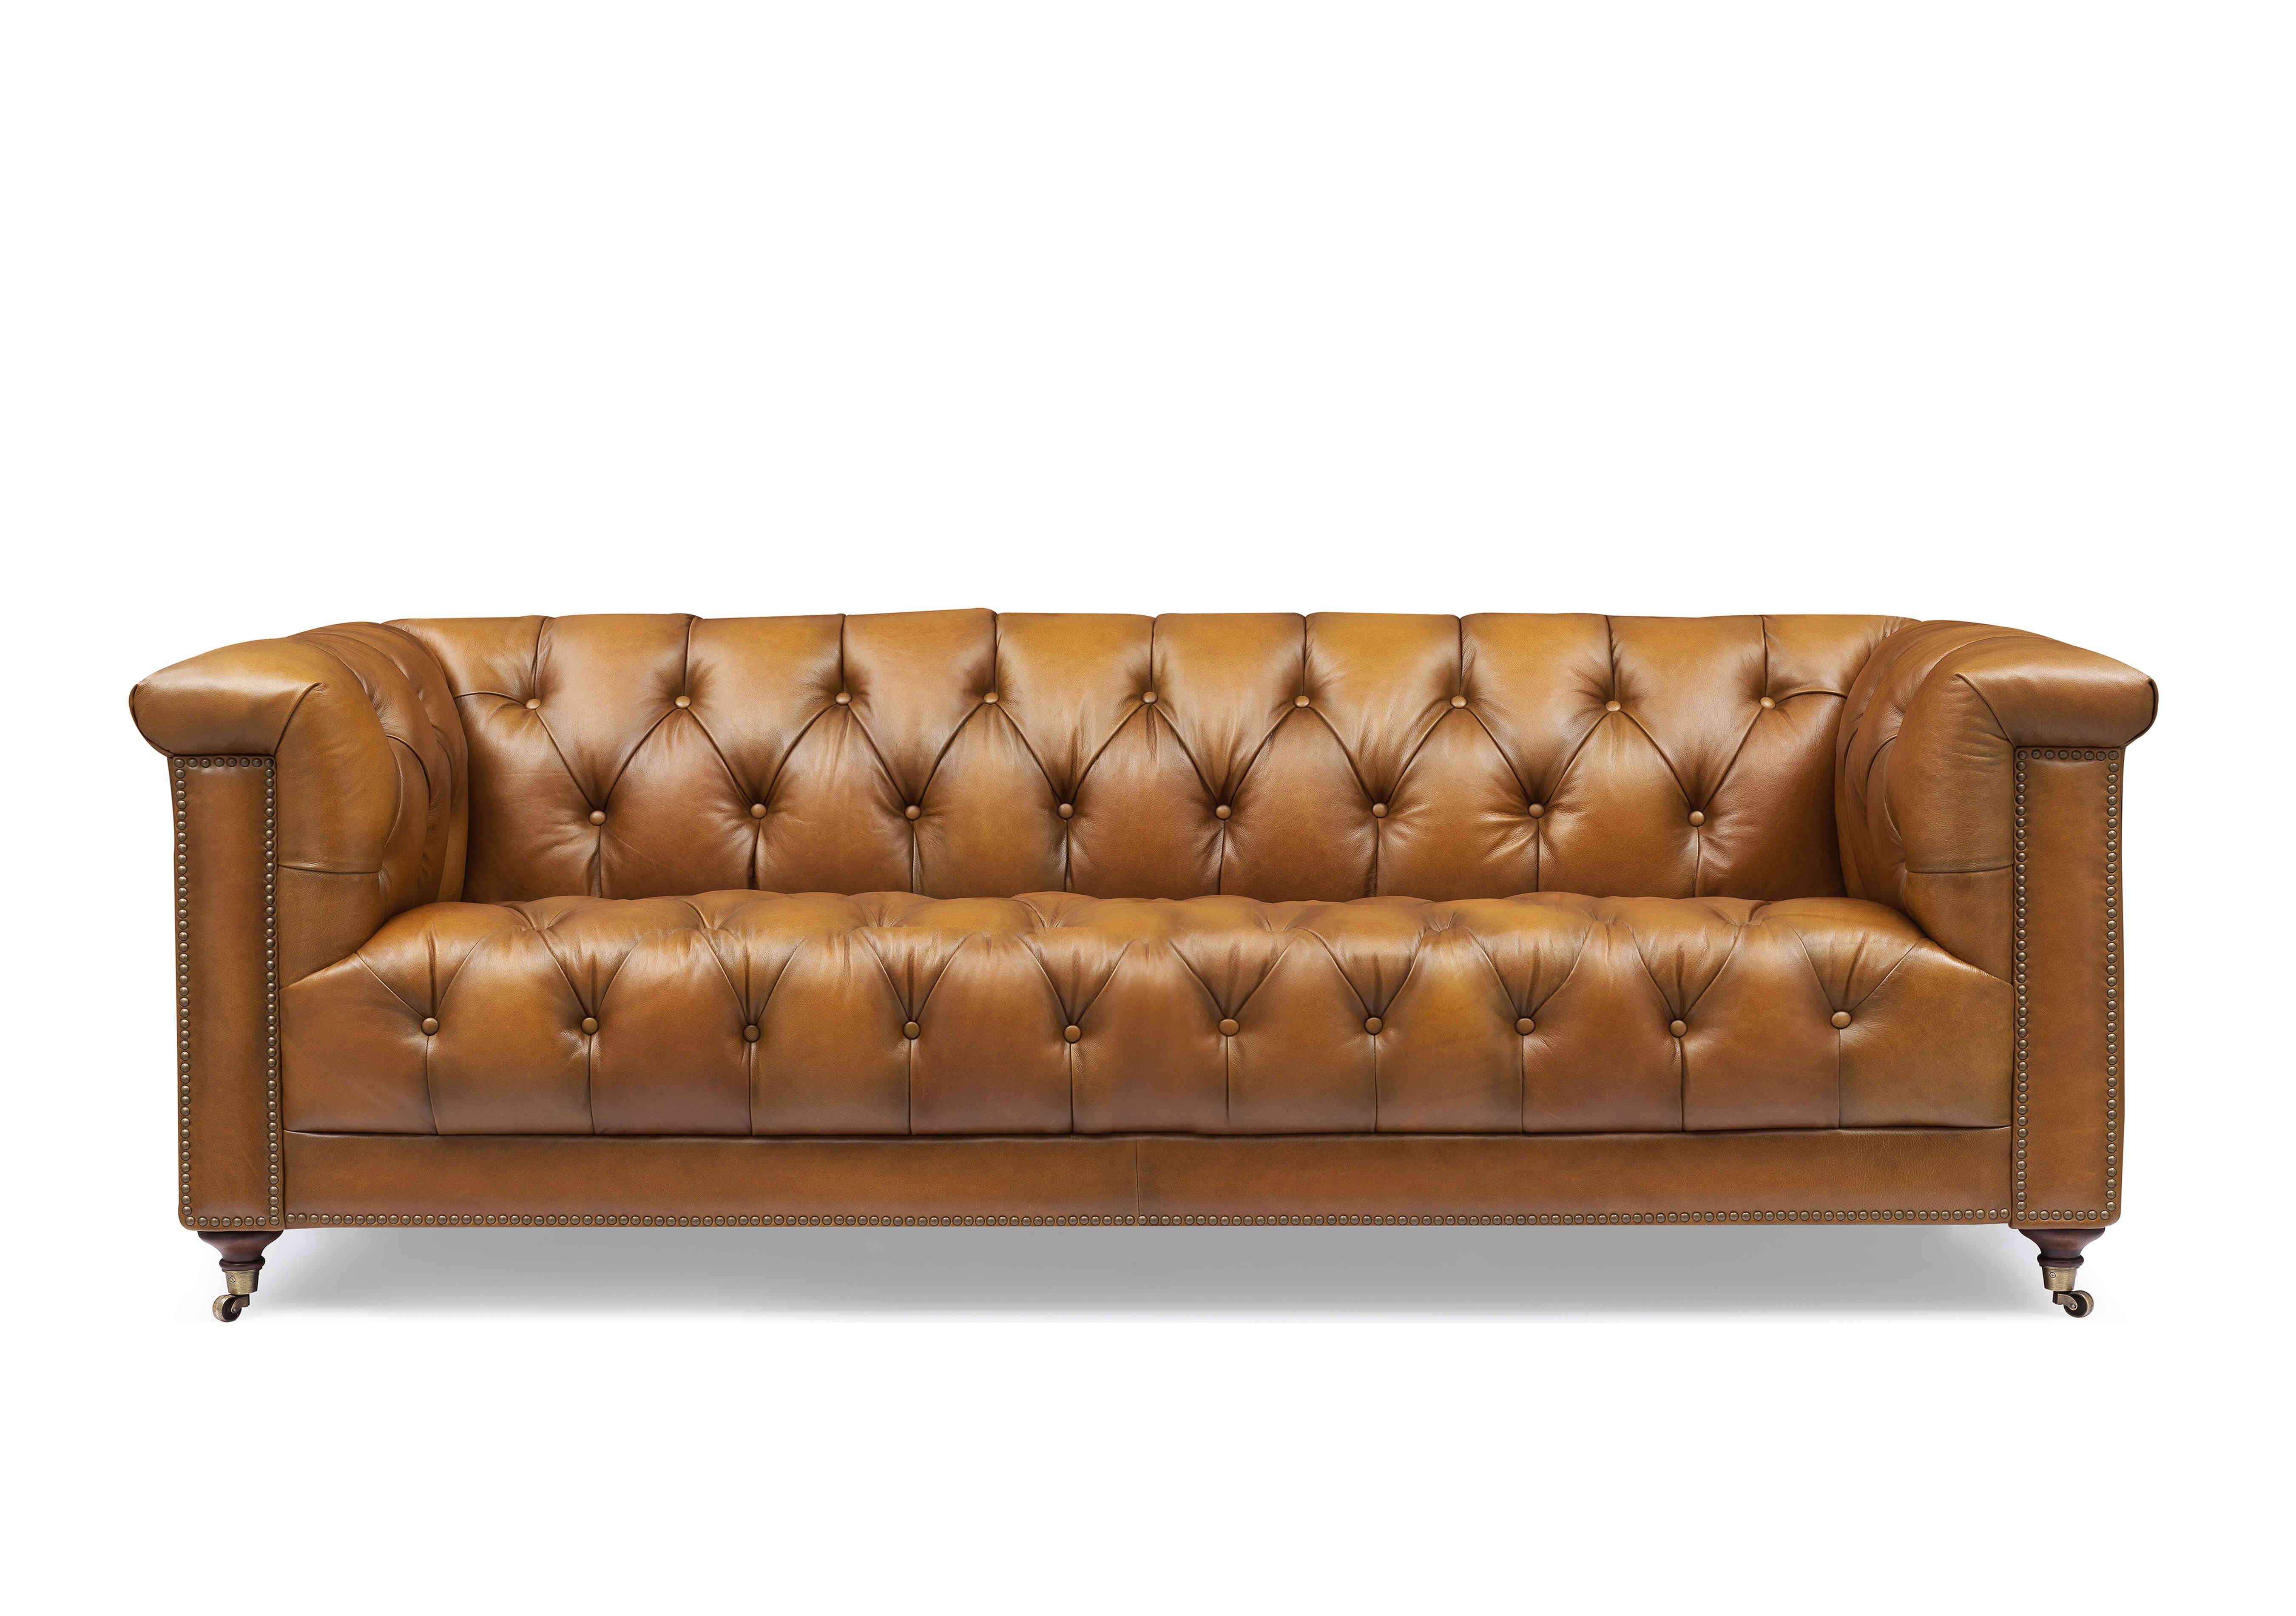 Wallace 4 Seater Leather Chesterfield Sofa in X3y1-1957ls Inca on Furniture Village